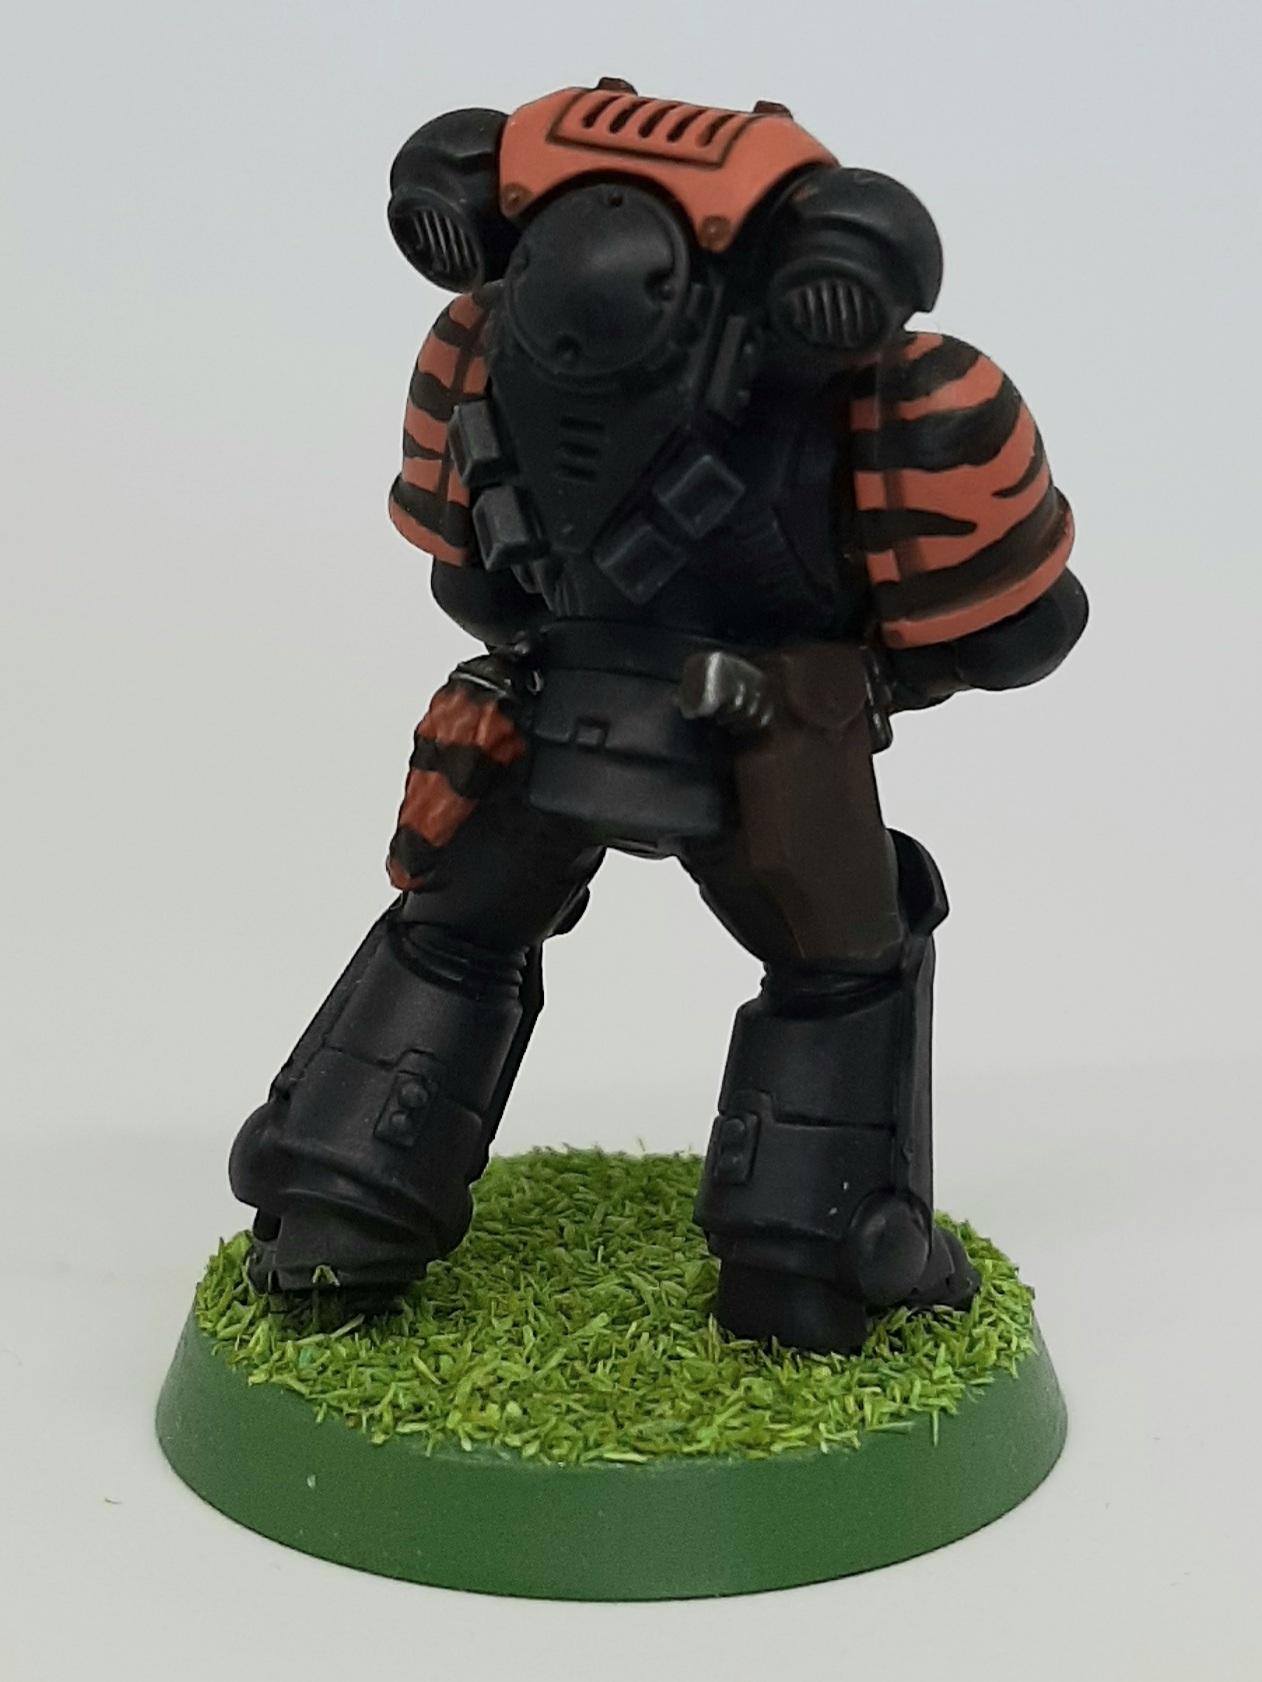 Bolter, Boltgun, Camouflage, Claw, Combat, Fang, Fighting, Forest, India, Intercessors, Jungle, Knife, Patrol, Paw, Pistol, Primaris, Saber, Space, Squad, Stripes, Tigers, Tooth, Veda, Wolf